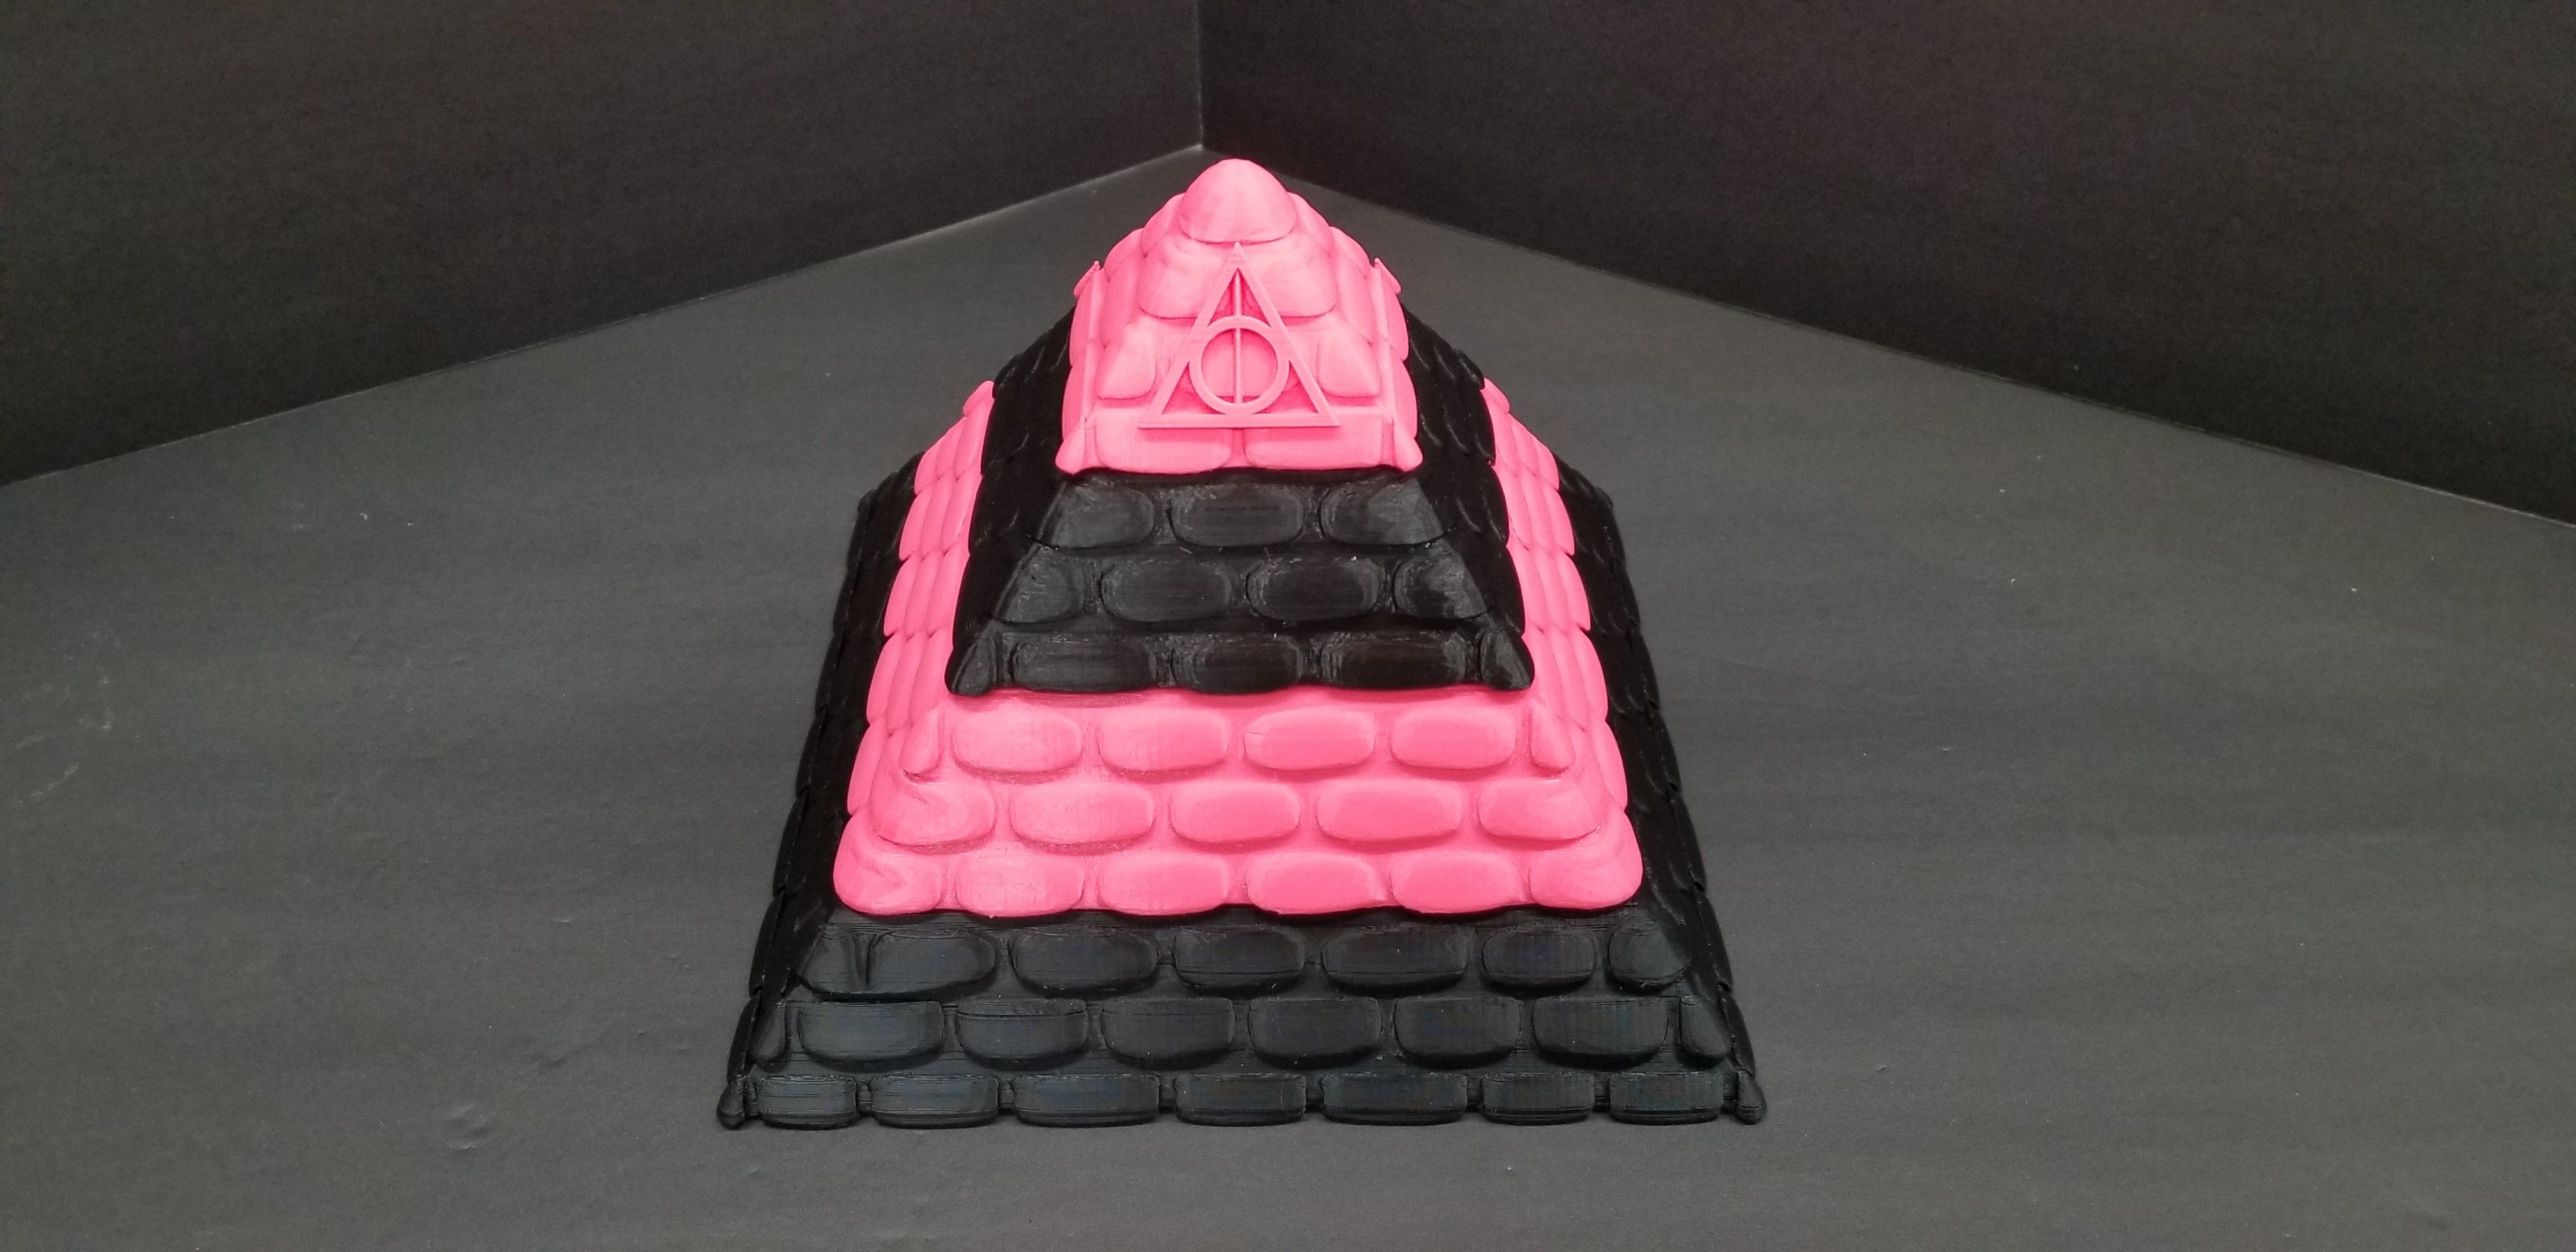 20190528_181505.jpg Download free STL file POTTER PYRAMID BOX with a Chamber of secrets • 3D printable model, LittleTup